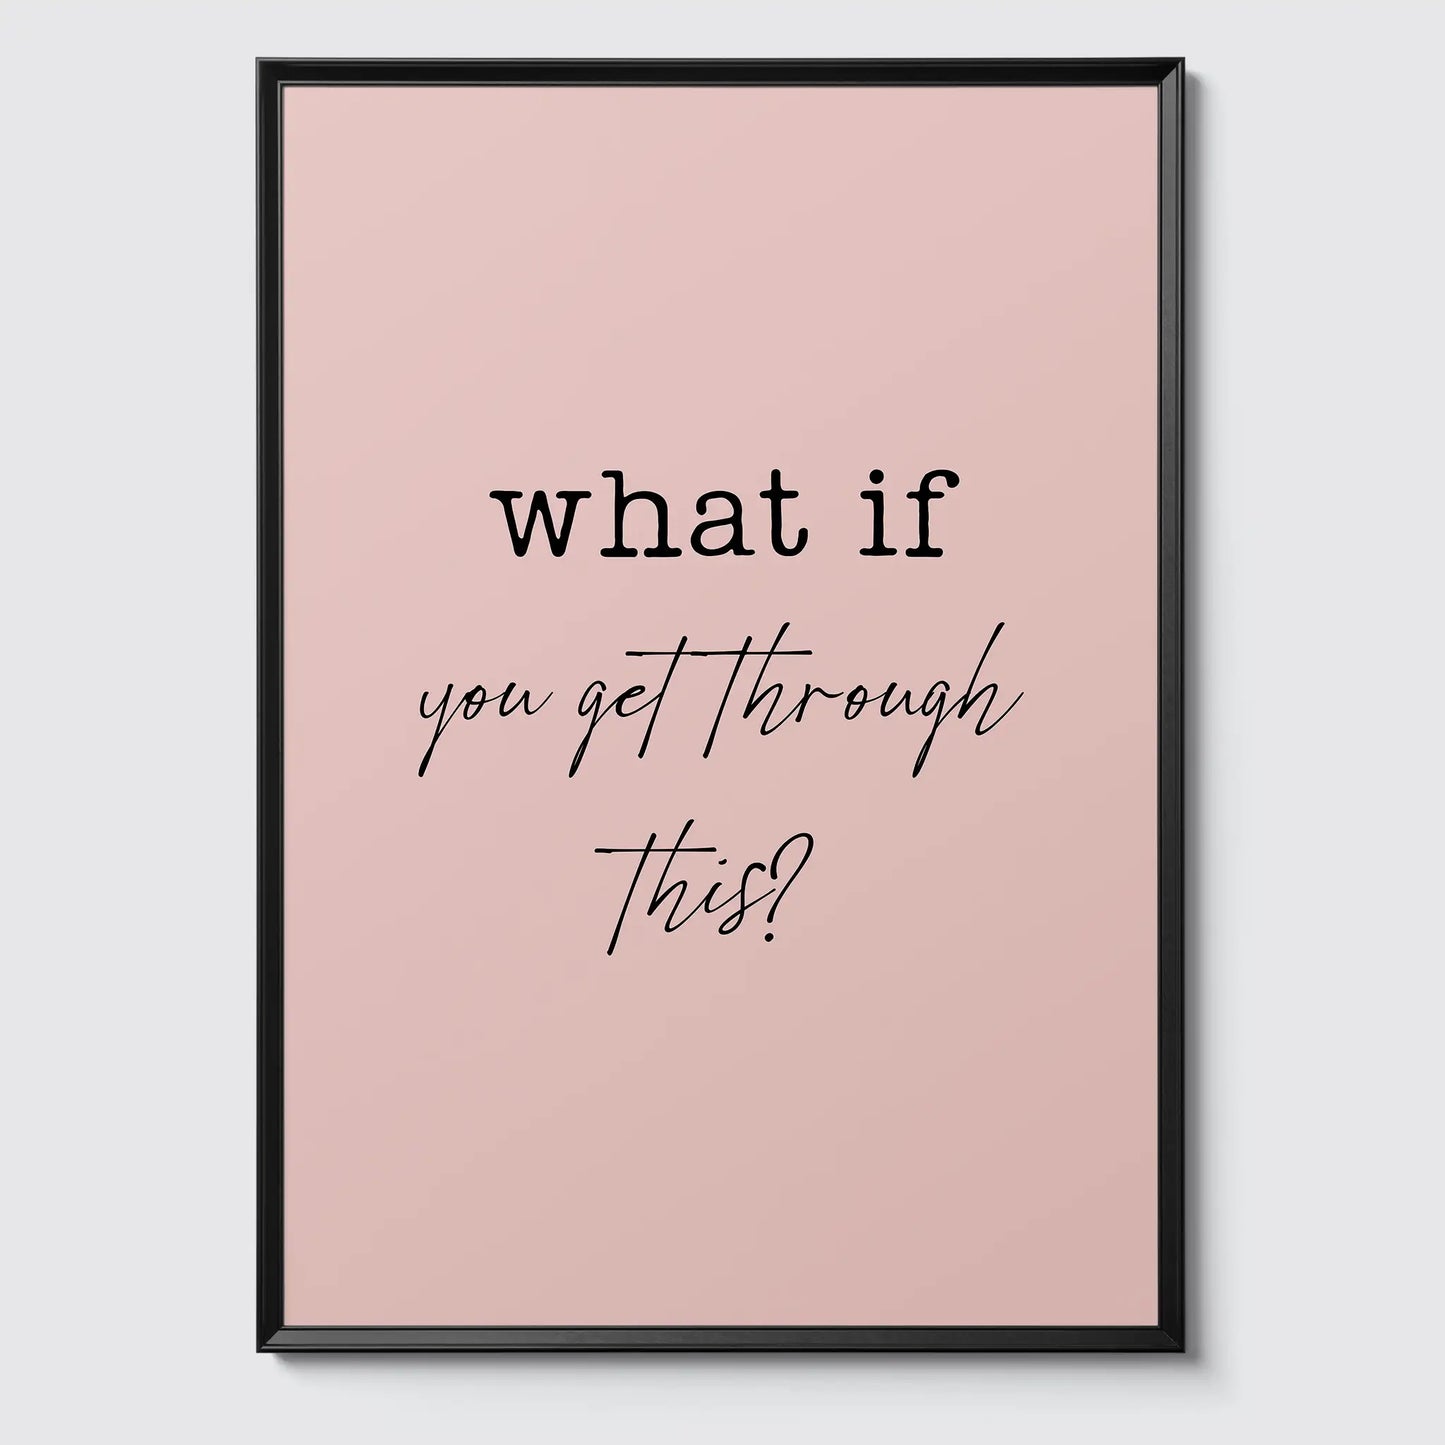 WHAT IF you get through this? - Poster